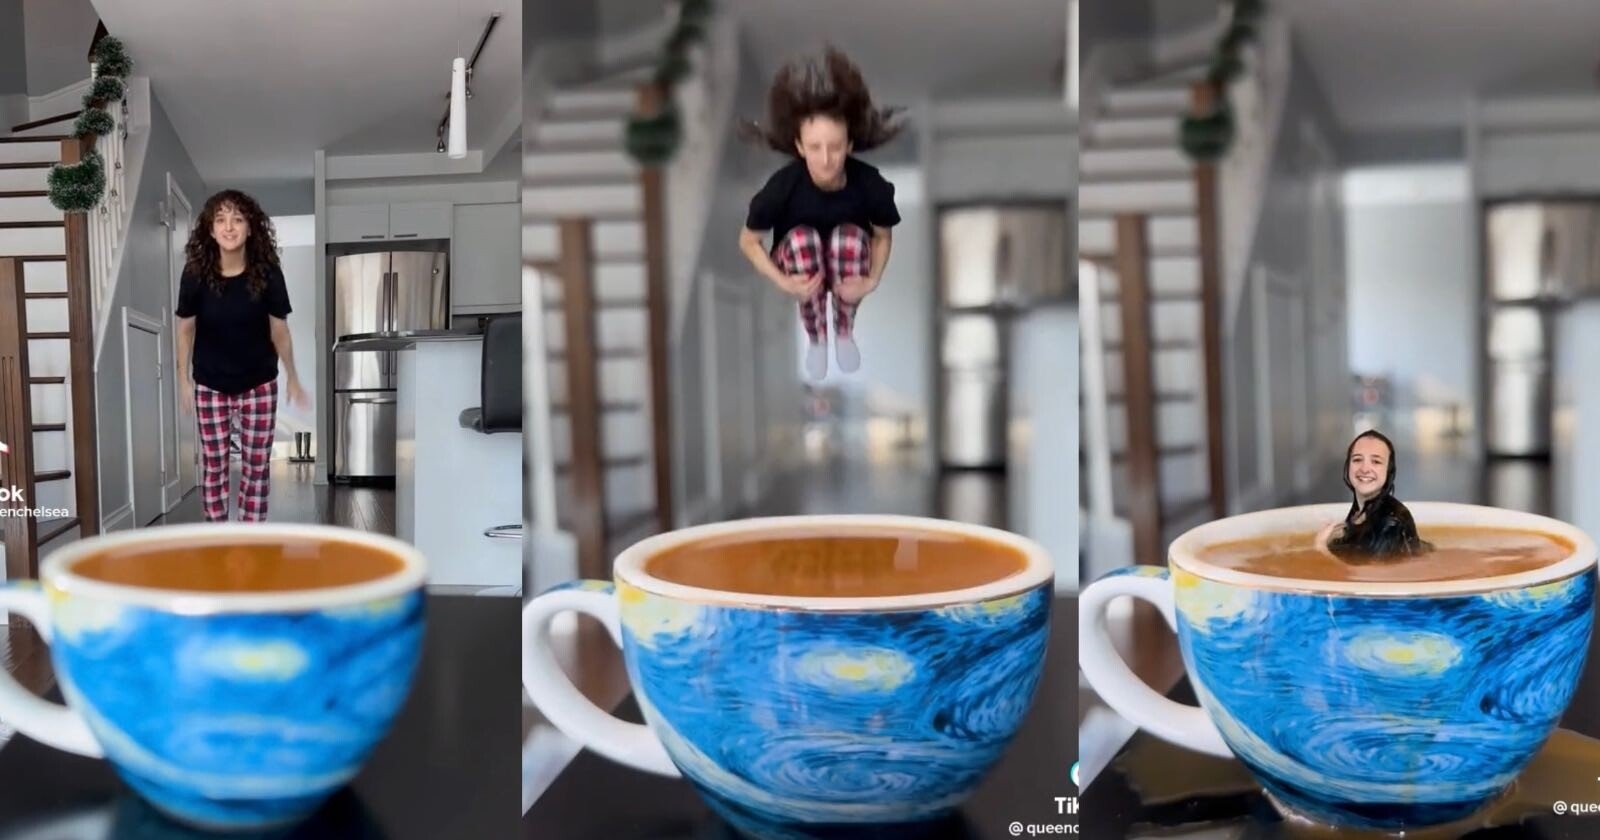  artist jumps into her morning coffee mind-bending video 